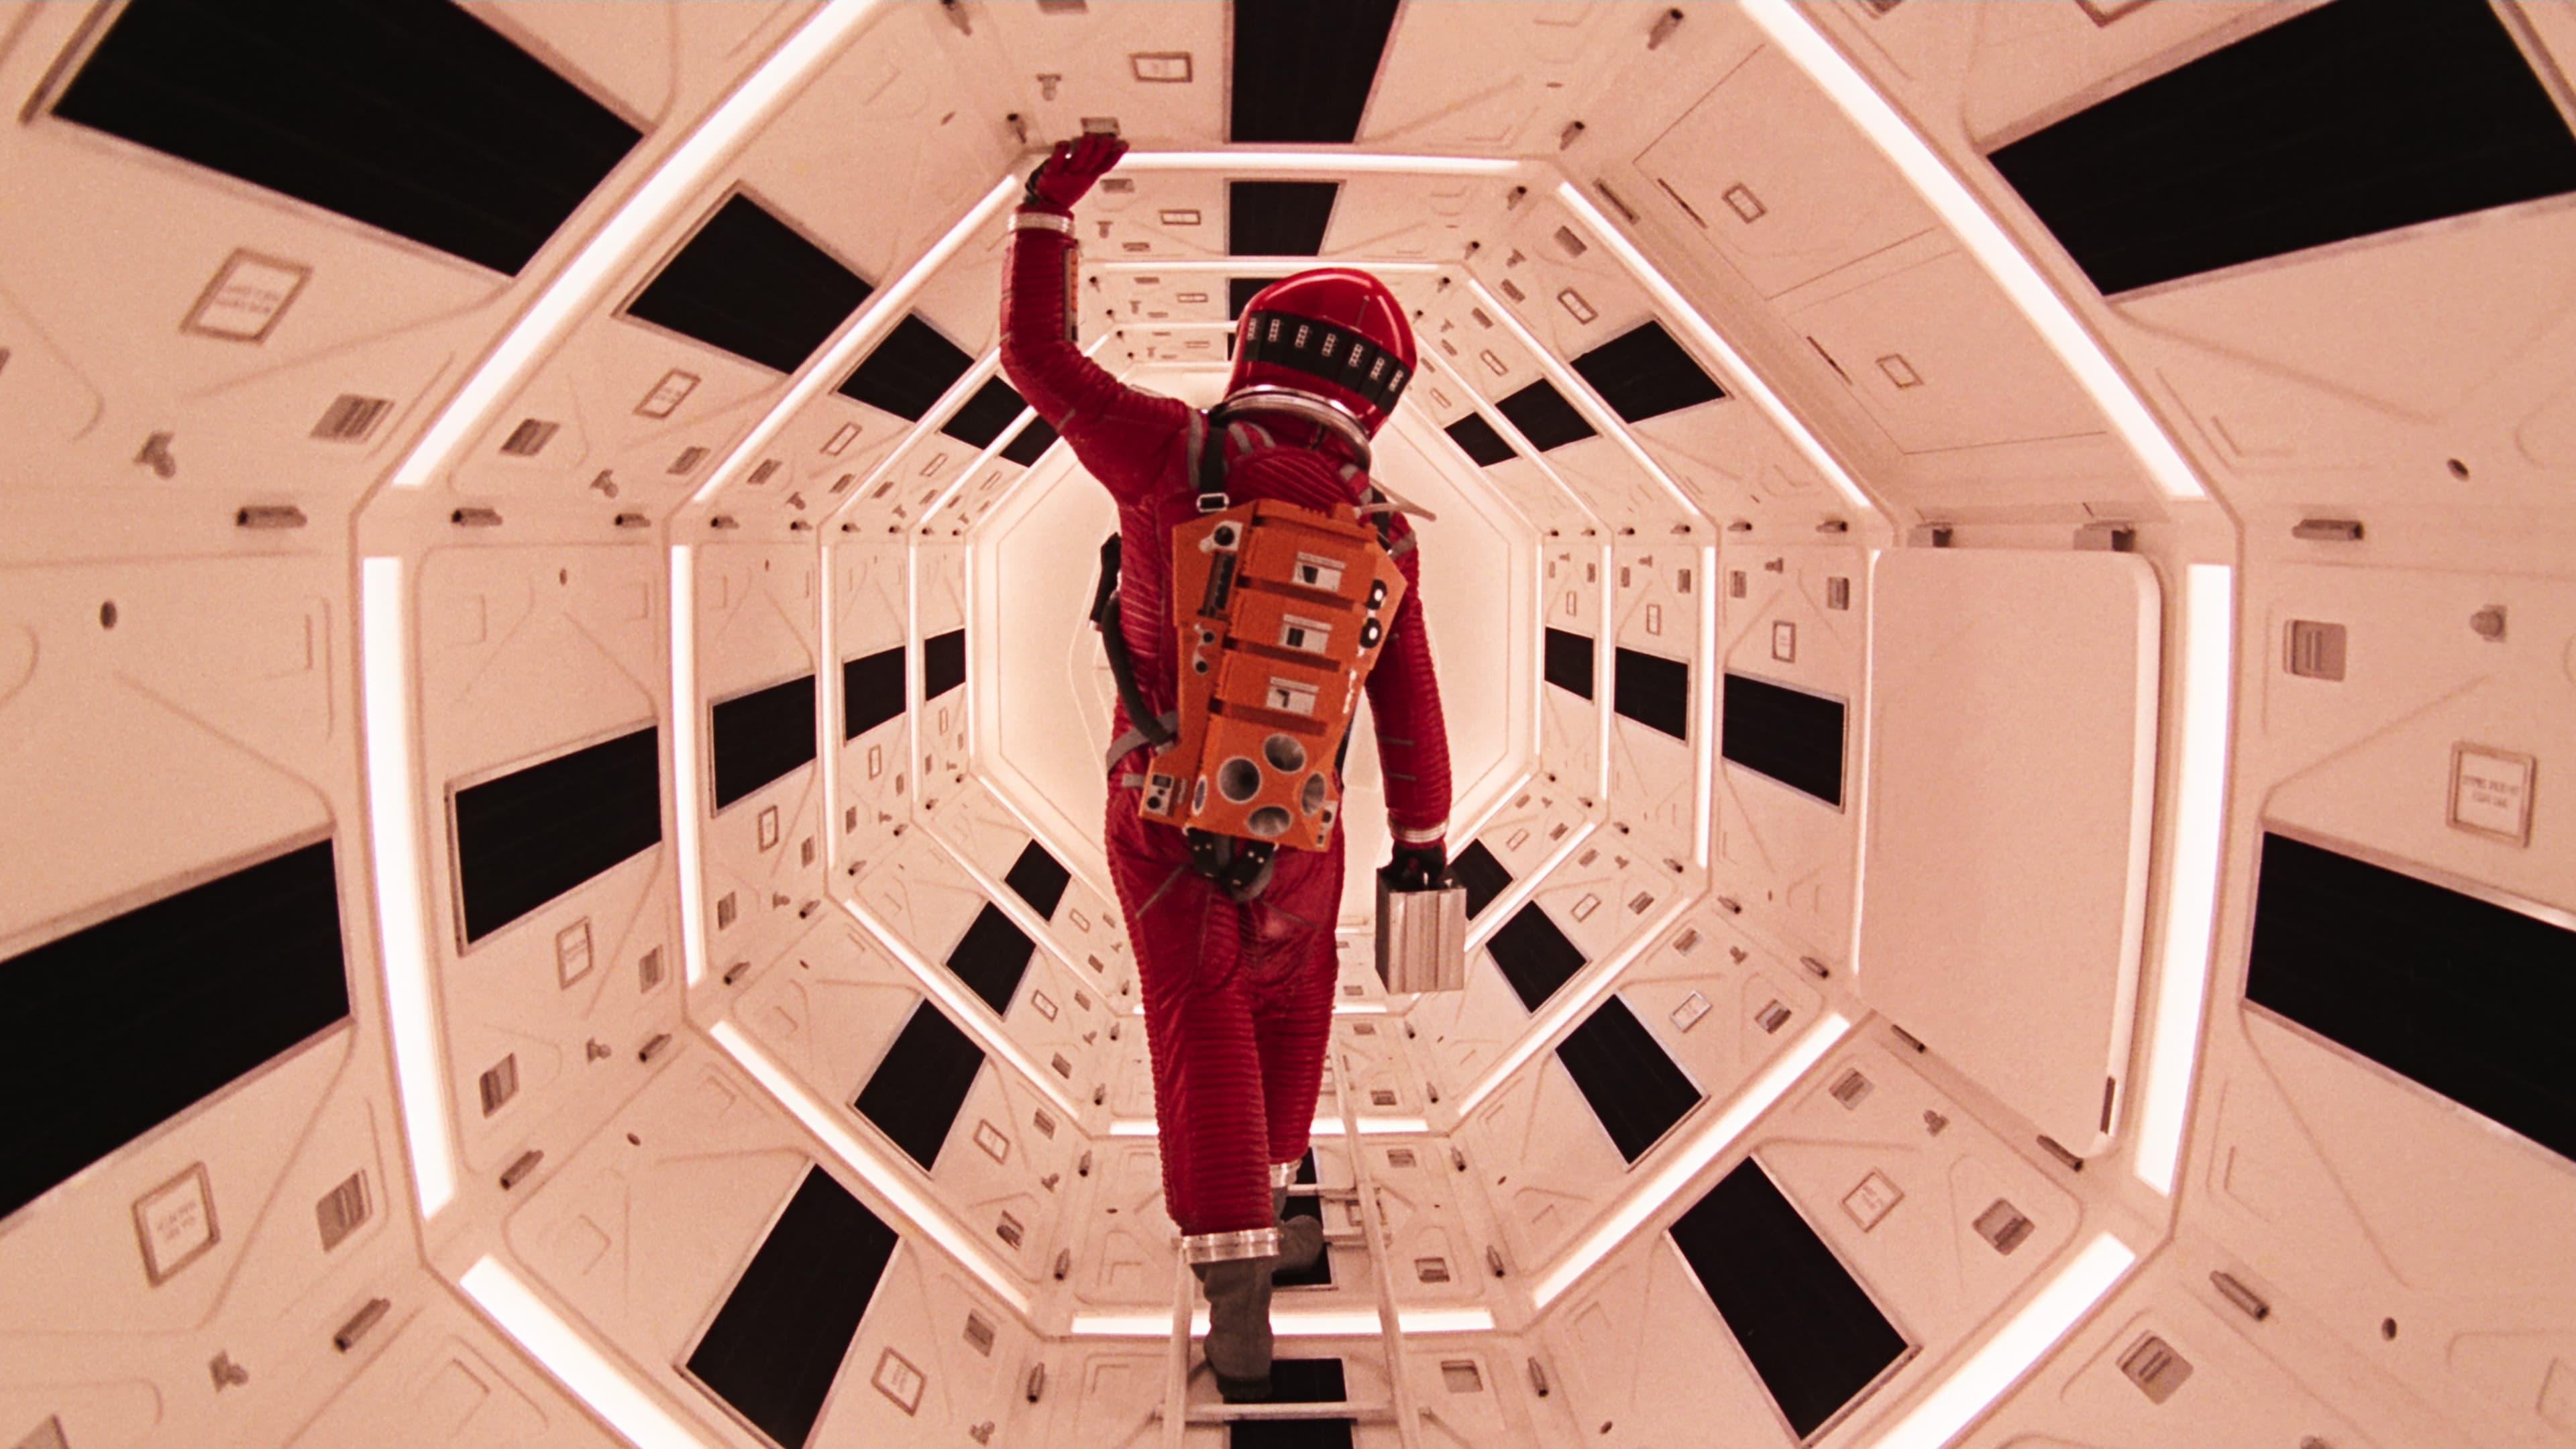 Stanley Kubrick's classic is available to stream on Tubi this December.